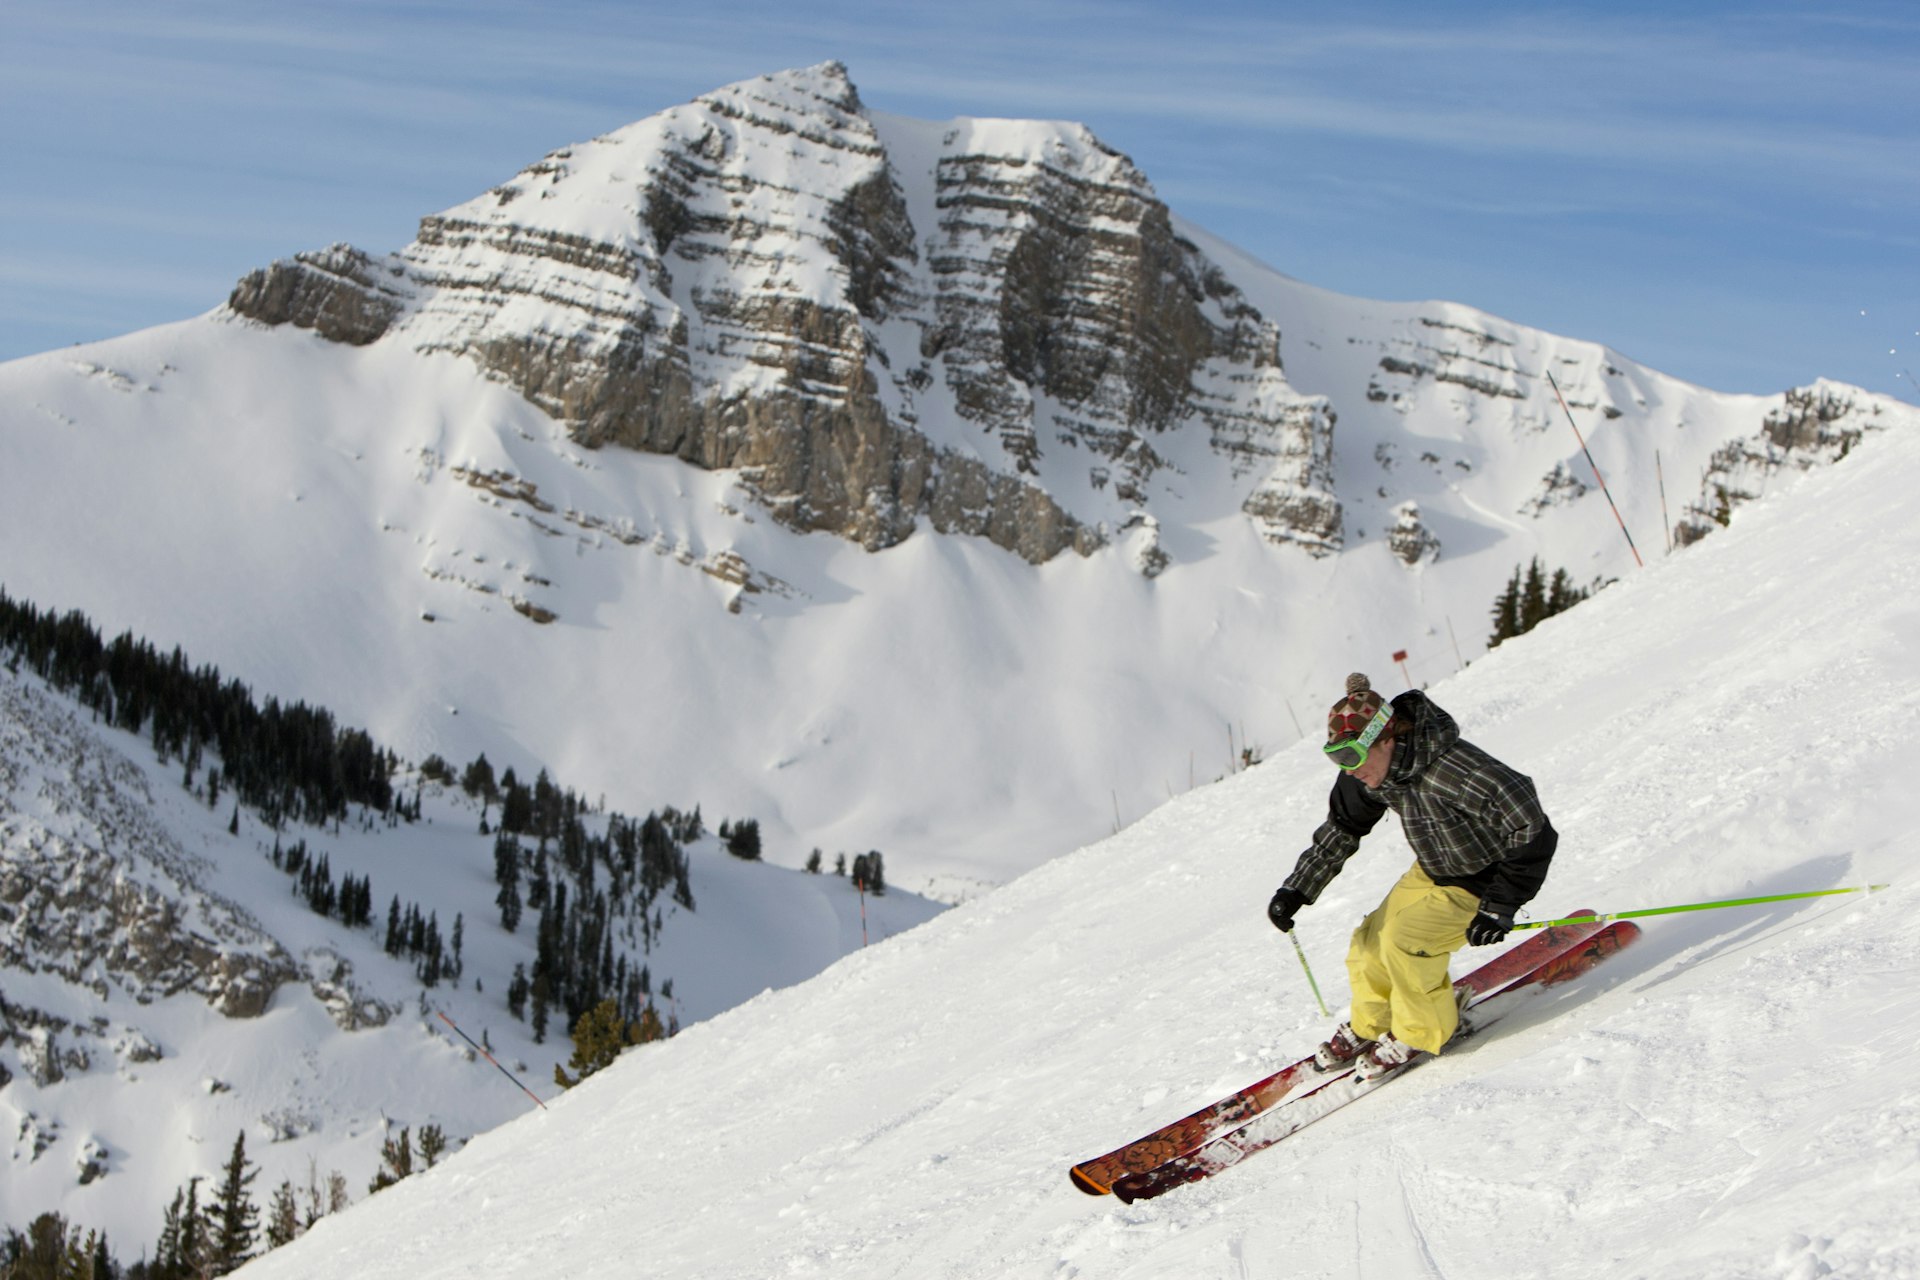 A person skis down a snowy slope with a rocky mountain peak in the background. Jackson Hole, Wyoming